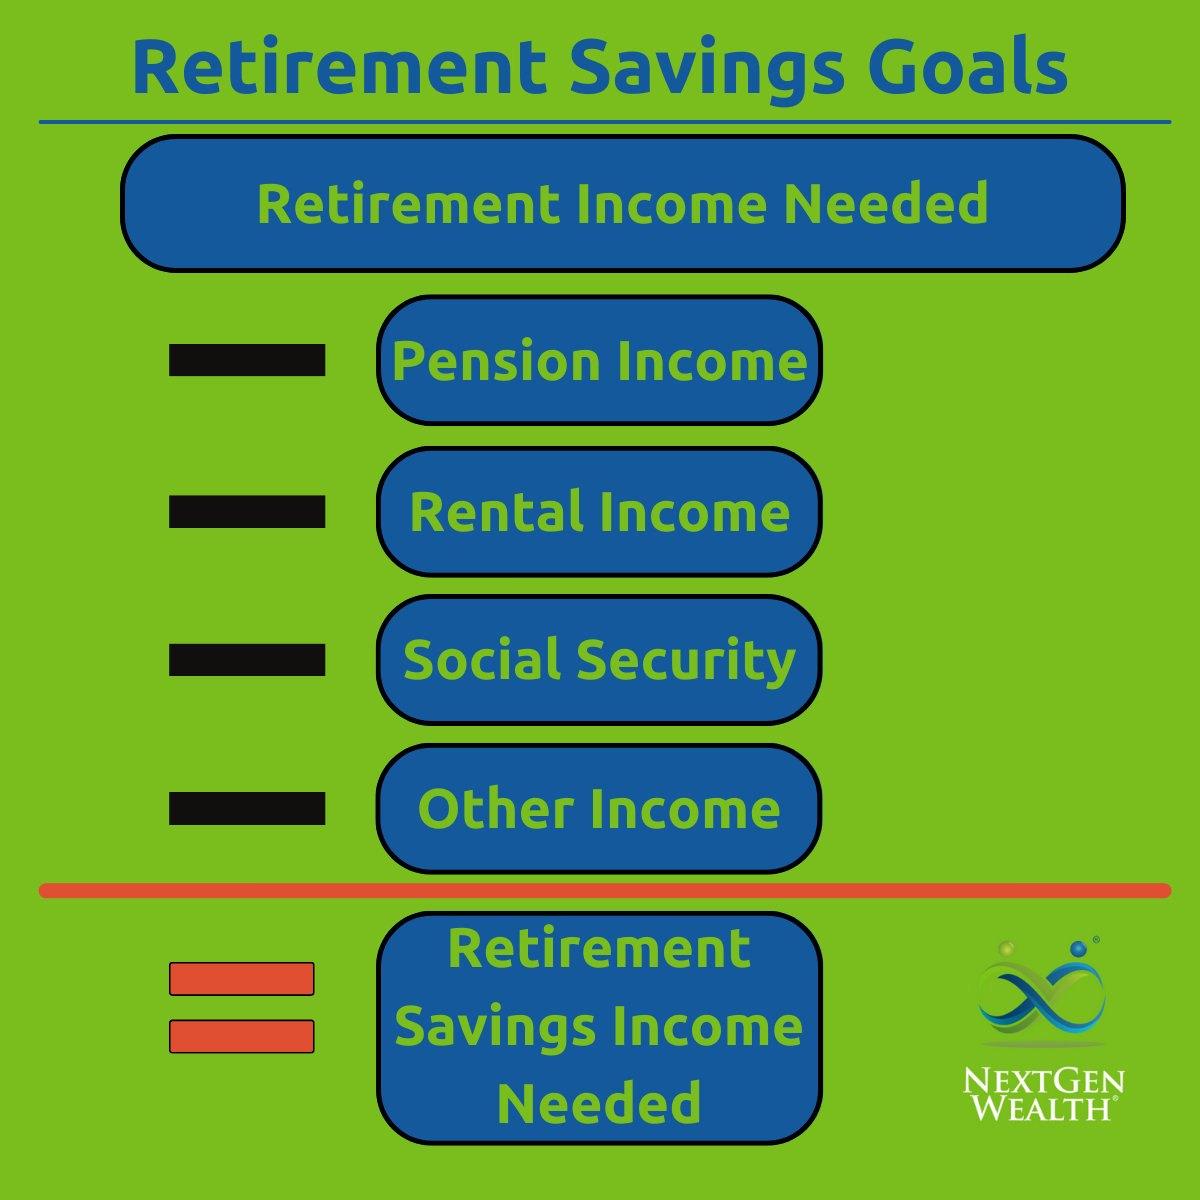 How Much Should I Have Saved by the Time I Want to Retire Calculations